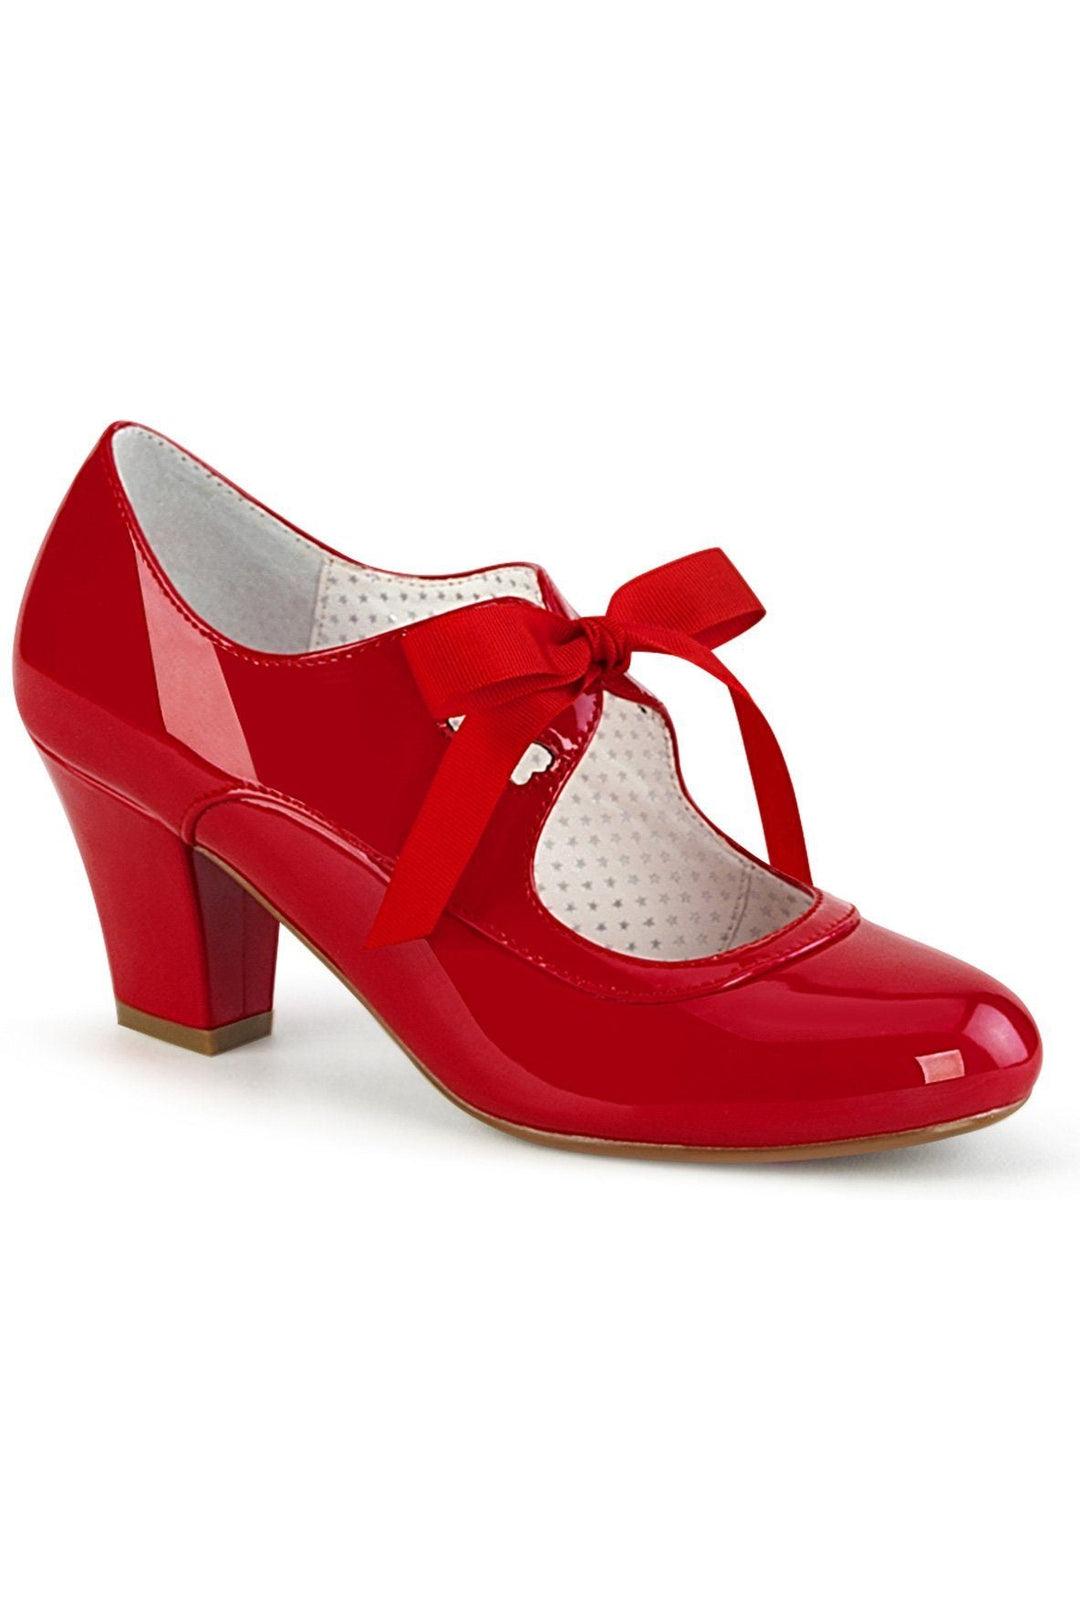 WIGGLE-32 Pump | Red Patent-Pumps-Pin Up Couture-Red-7-Patent-SEXYSHOES.COM